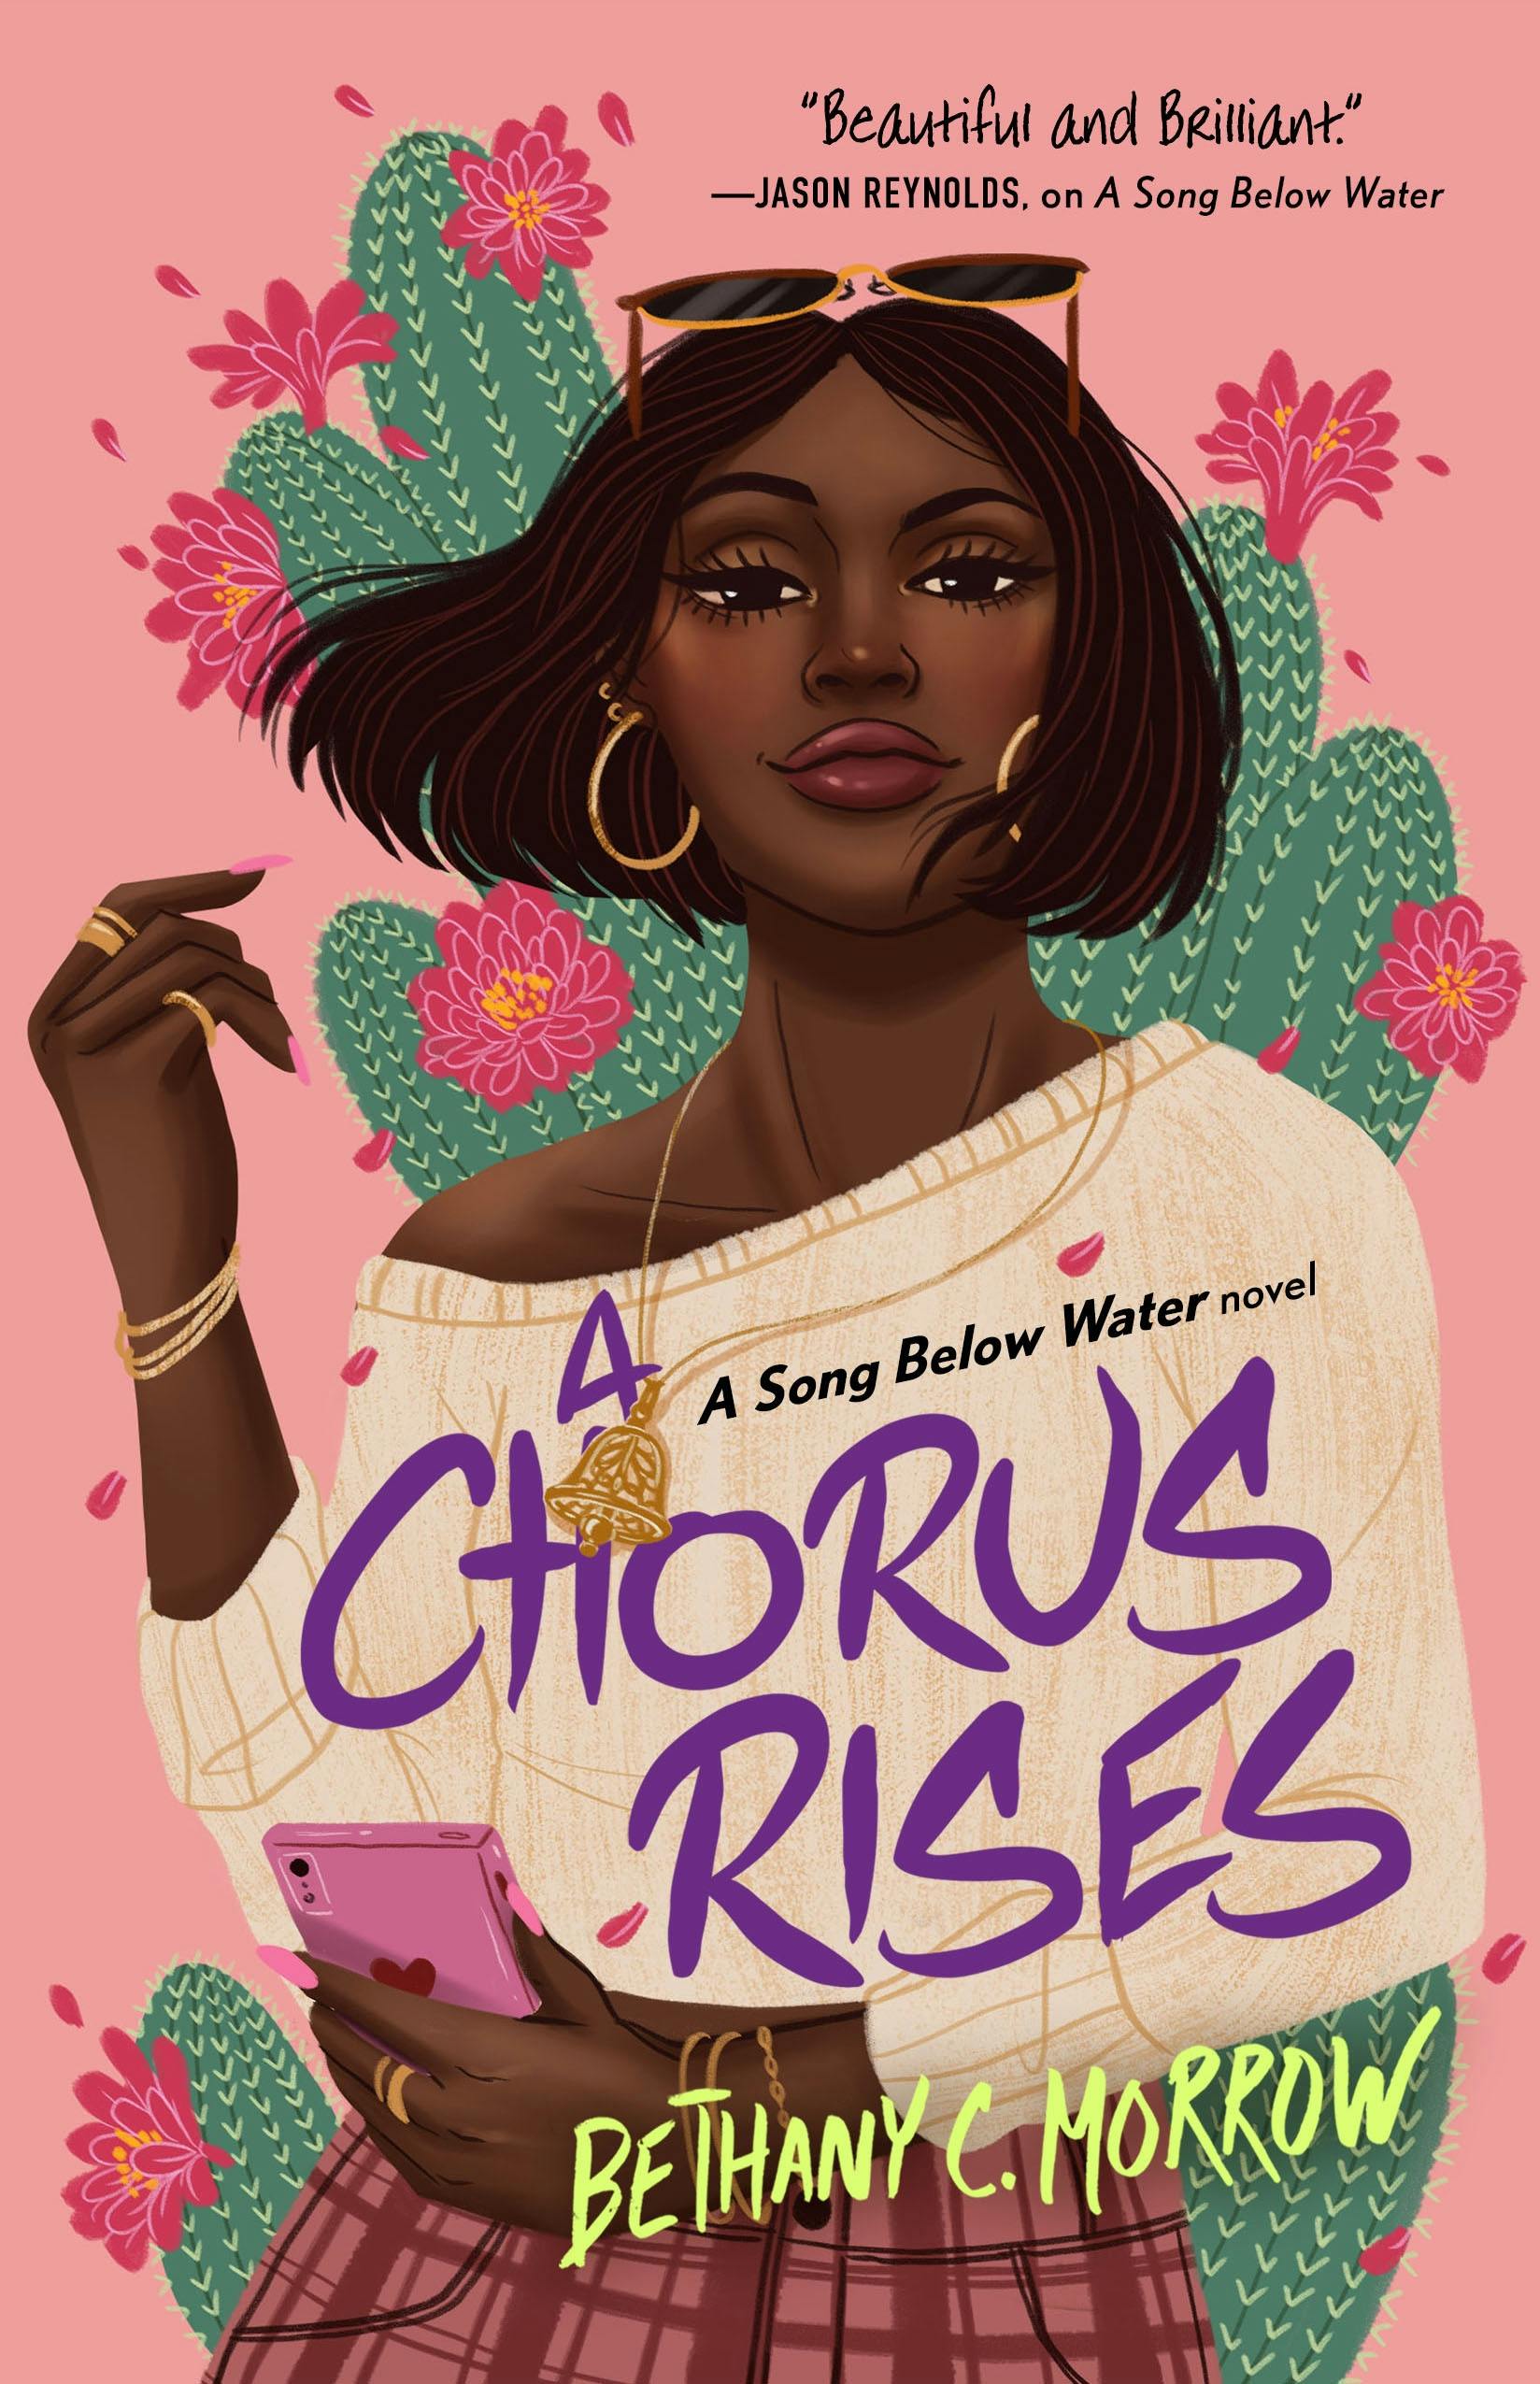 Cover for the book titled as: A Chorus Rises